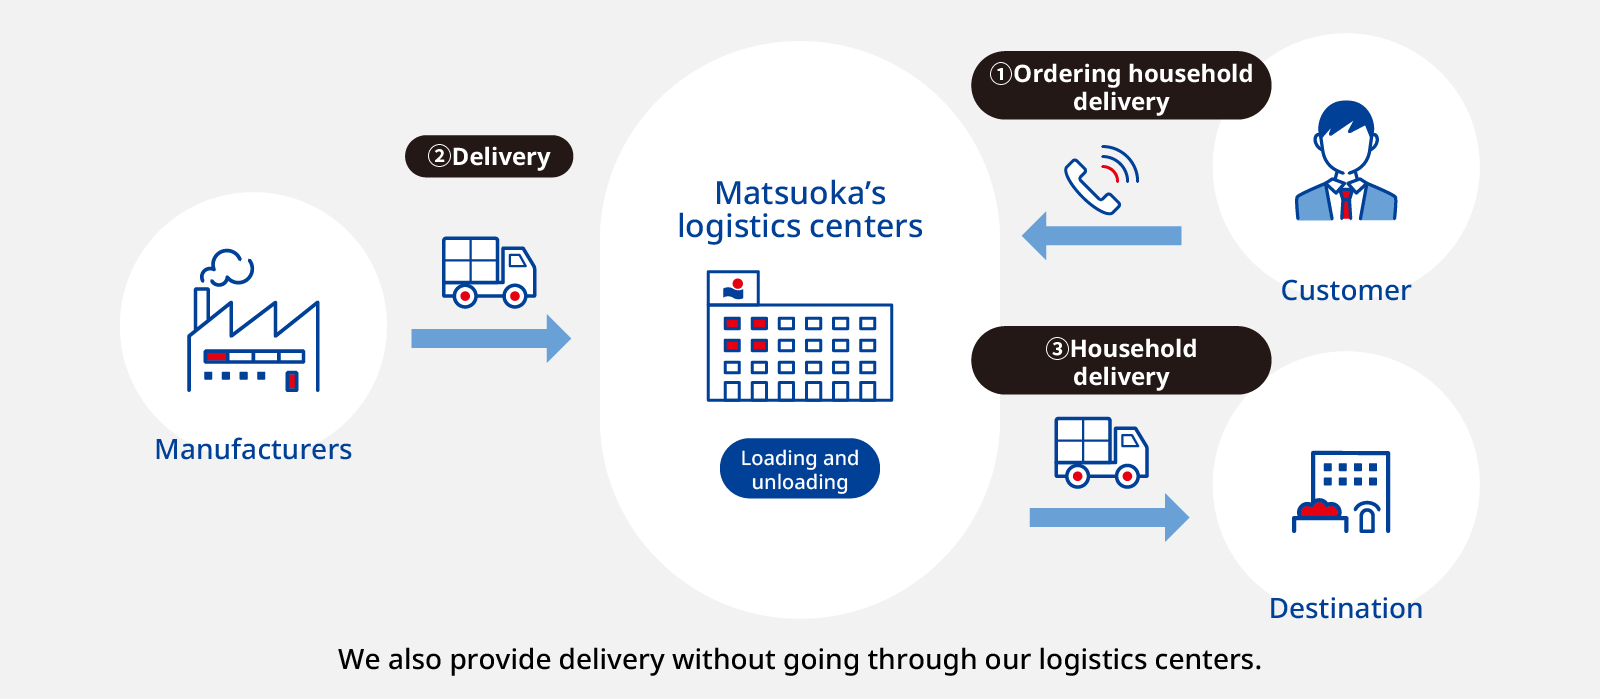 Ordering household delivery Household delivery Destination We also provide delivery without going through our logistics centers.